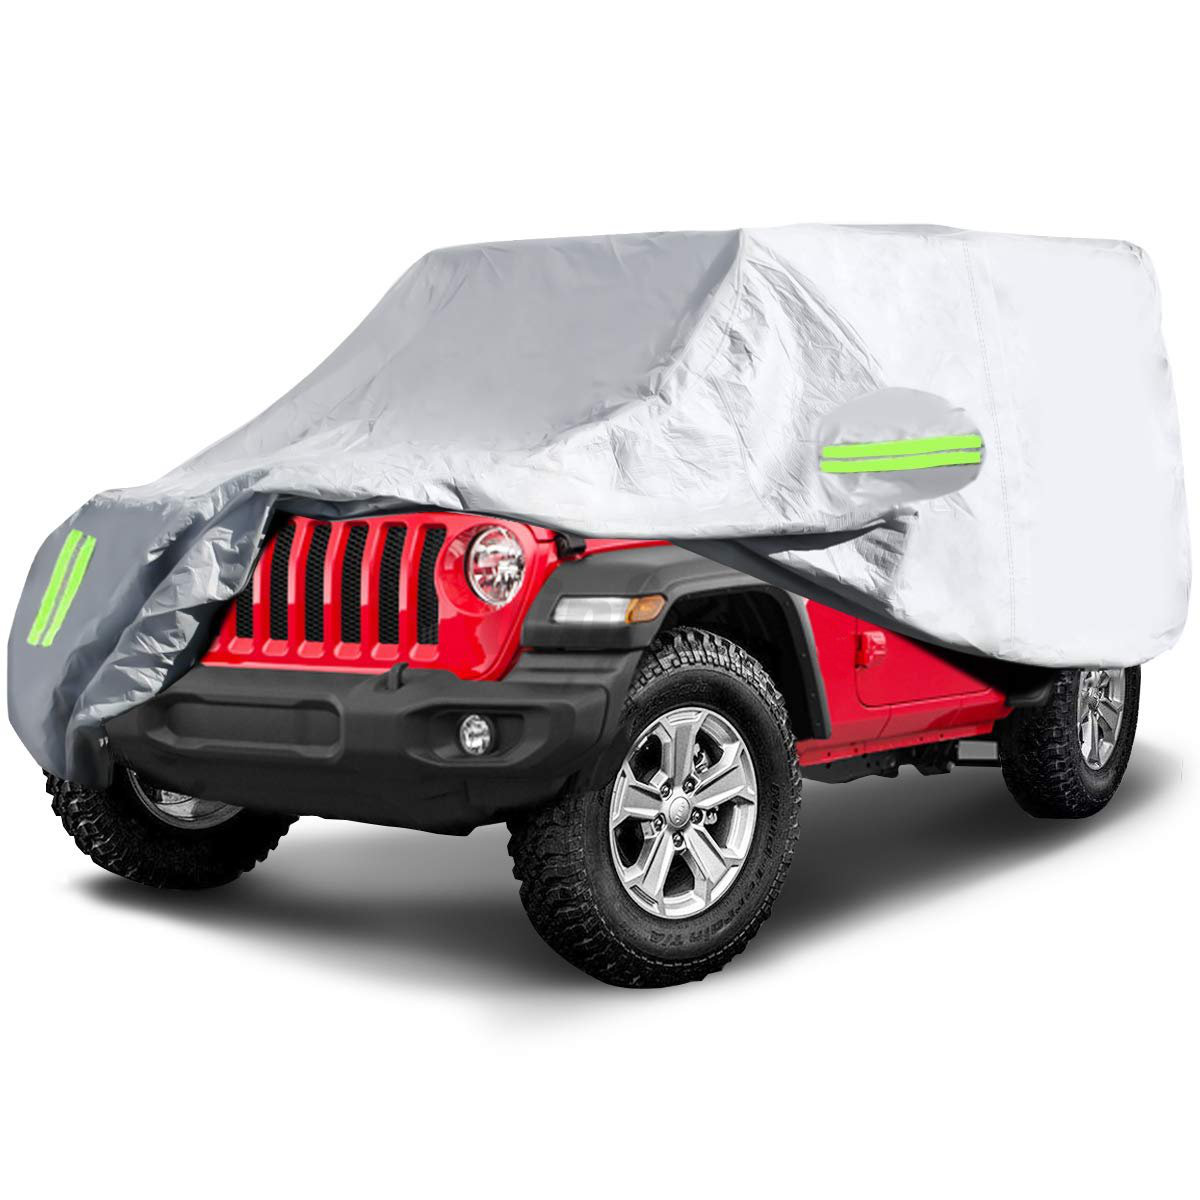 ELUTO Car Cover Wrangler Cover 2 Door Waterproof All Weather Upgrades Covers Waterproof Protection Outdoor Car Cover with 2 Gust Straps Fits up to 170''(170X75X60'')